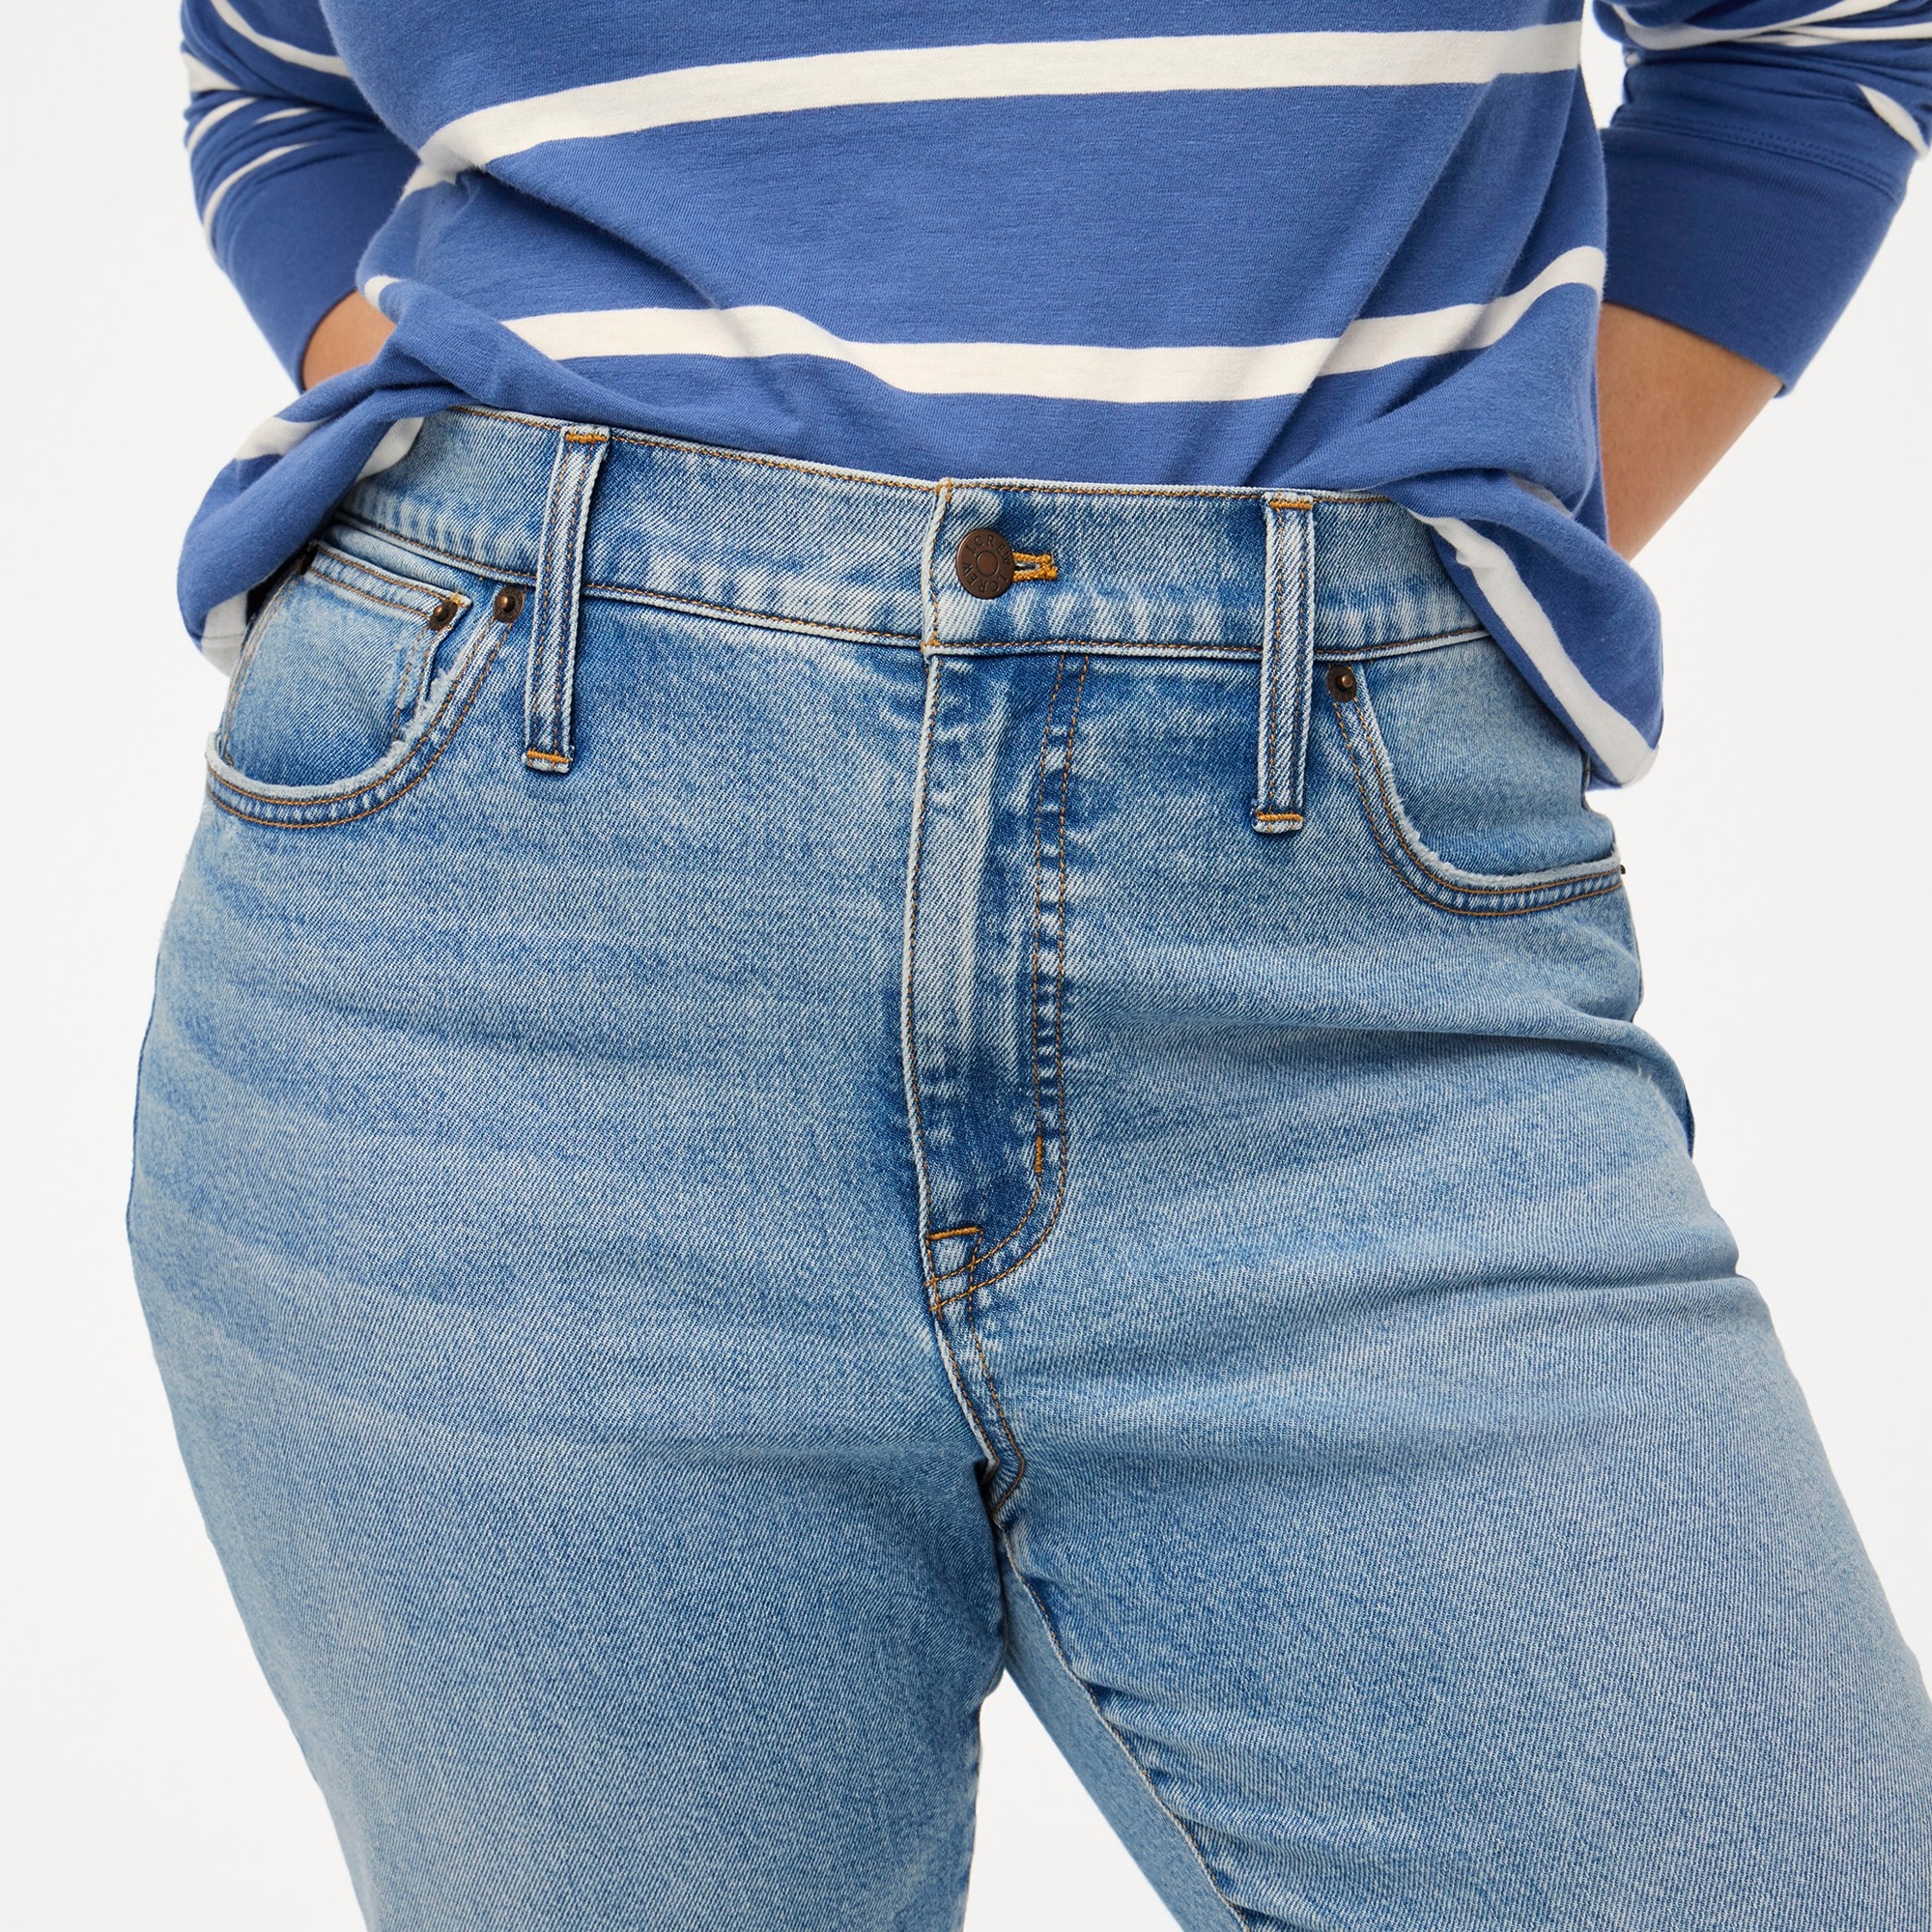 Essential straight jean all-day stretch